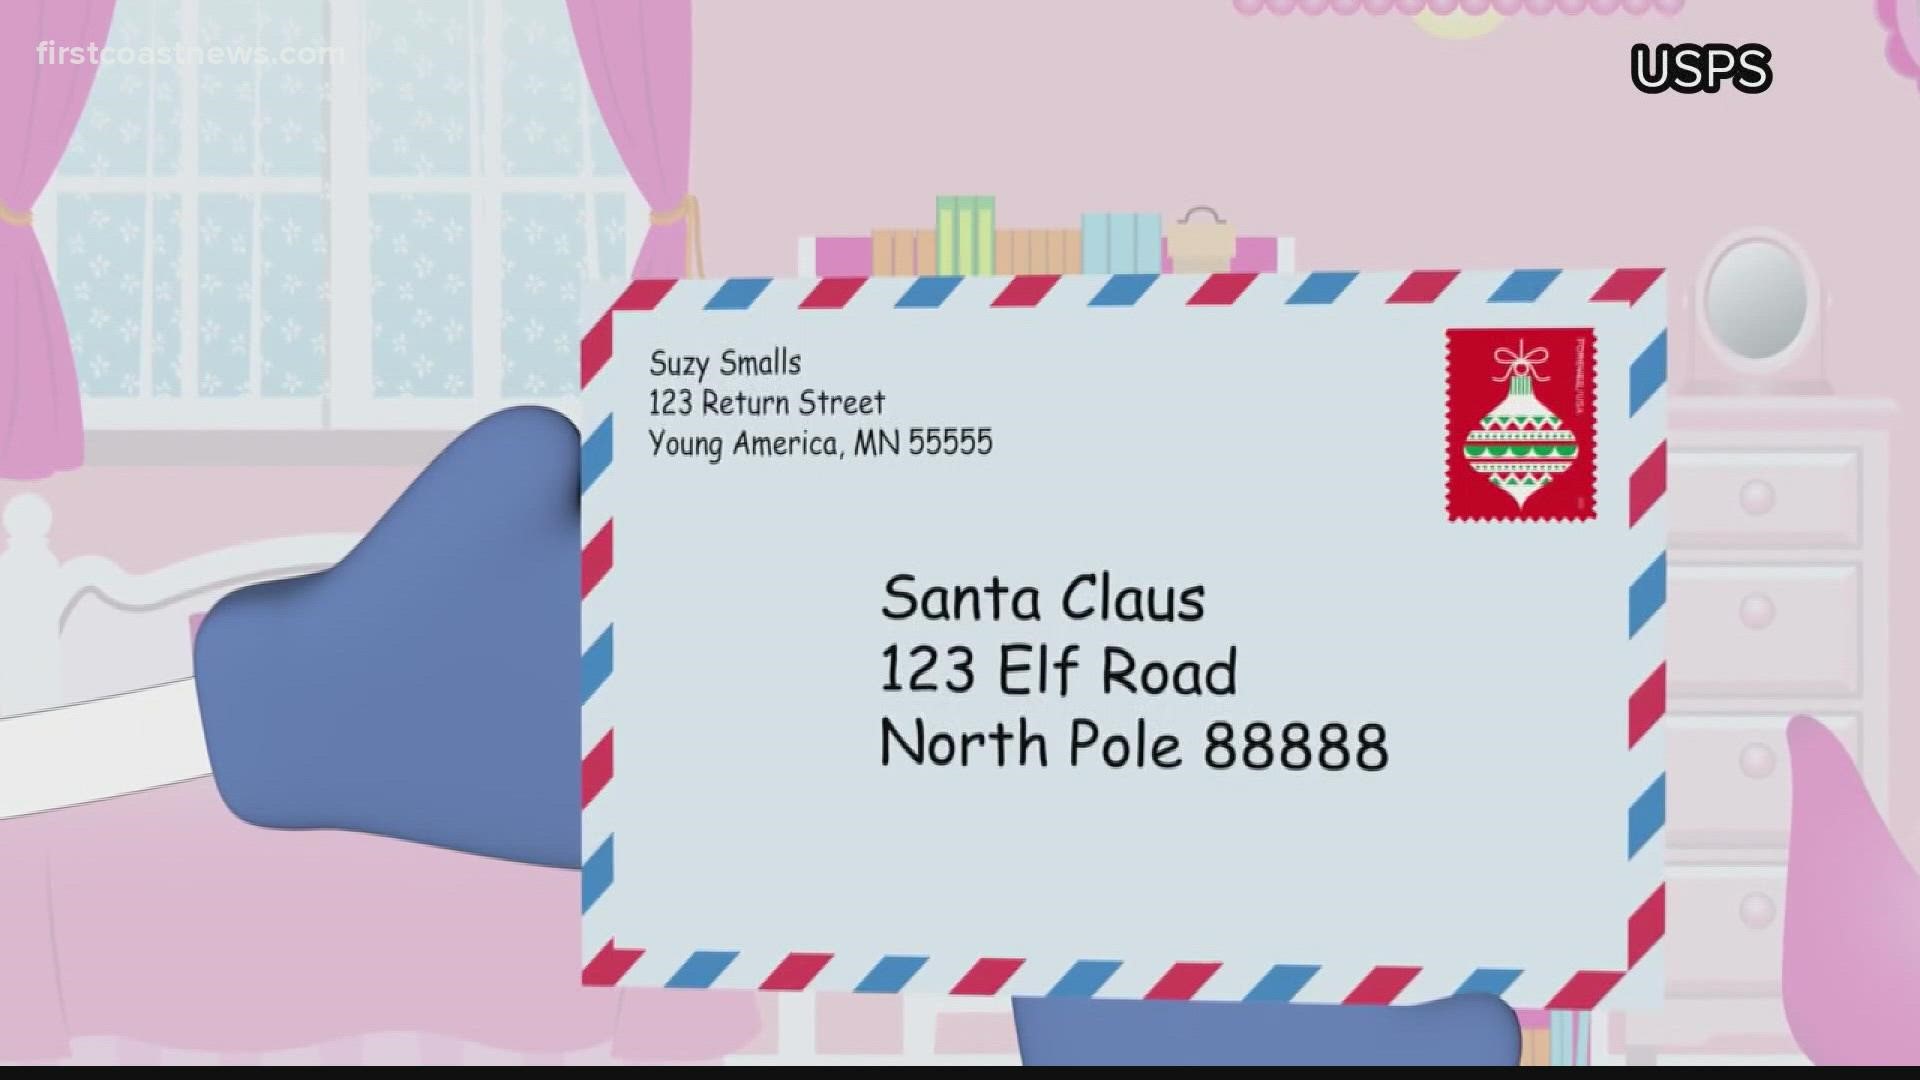 The project helps families in need and gives others the chance to adopt Santa letters to fulfill those wish lists!